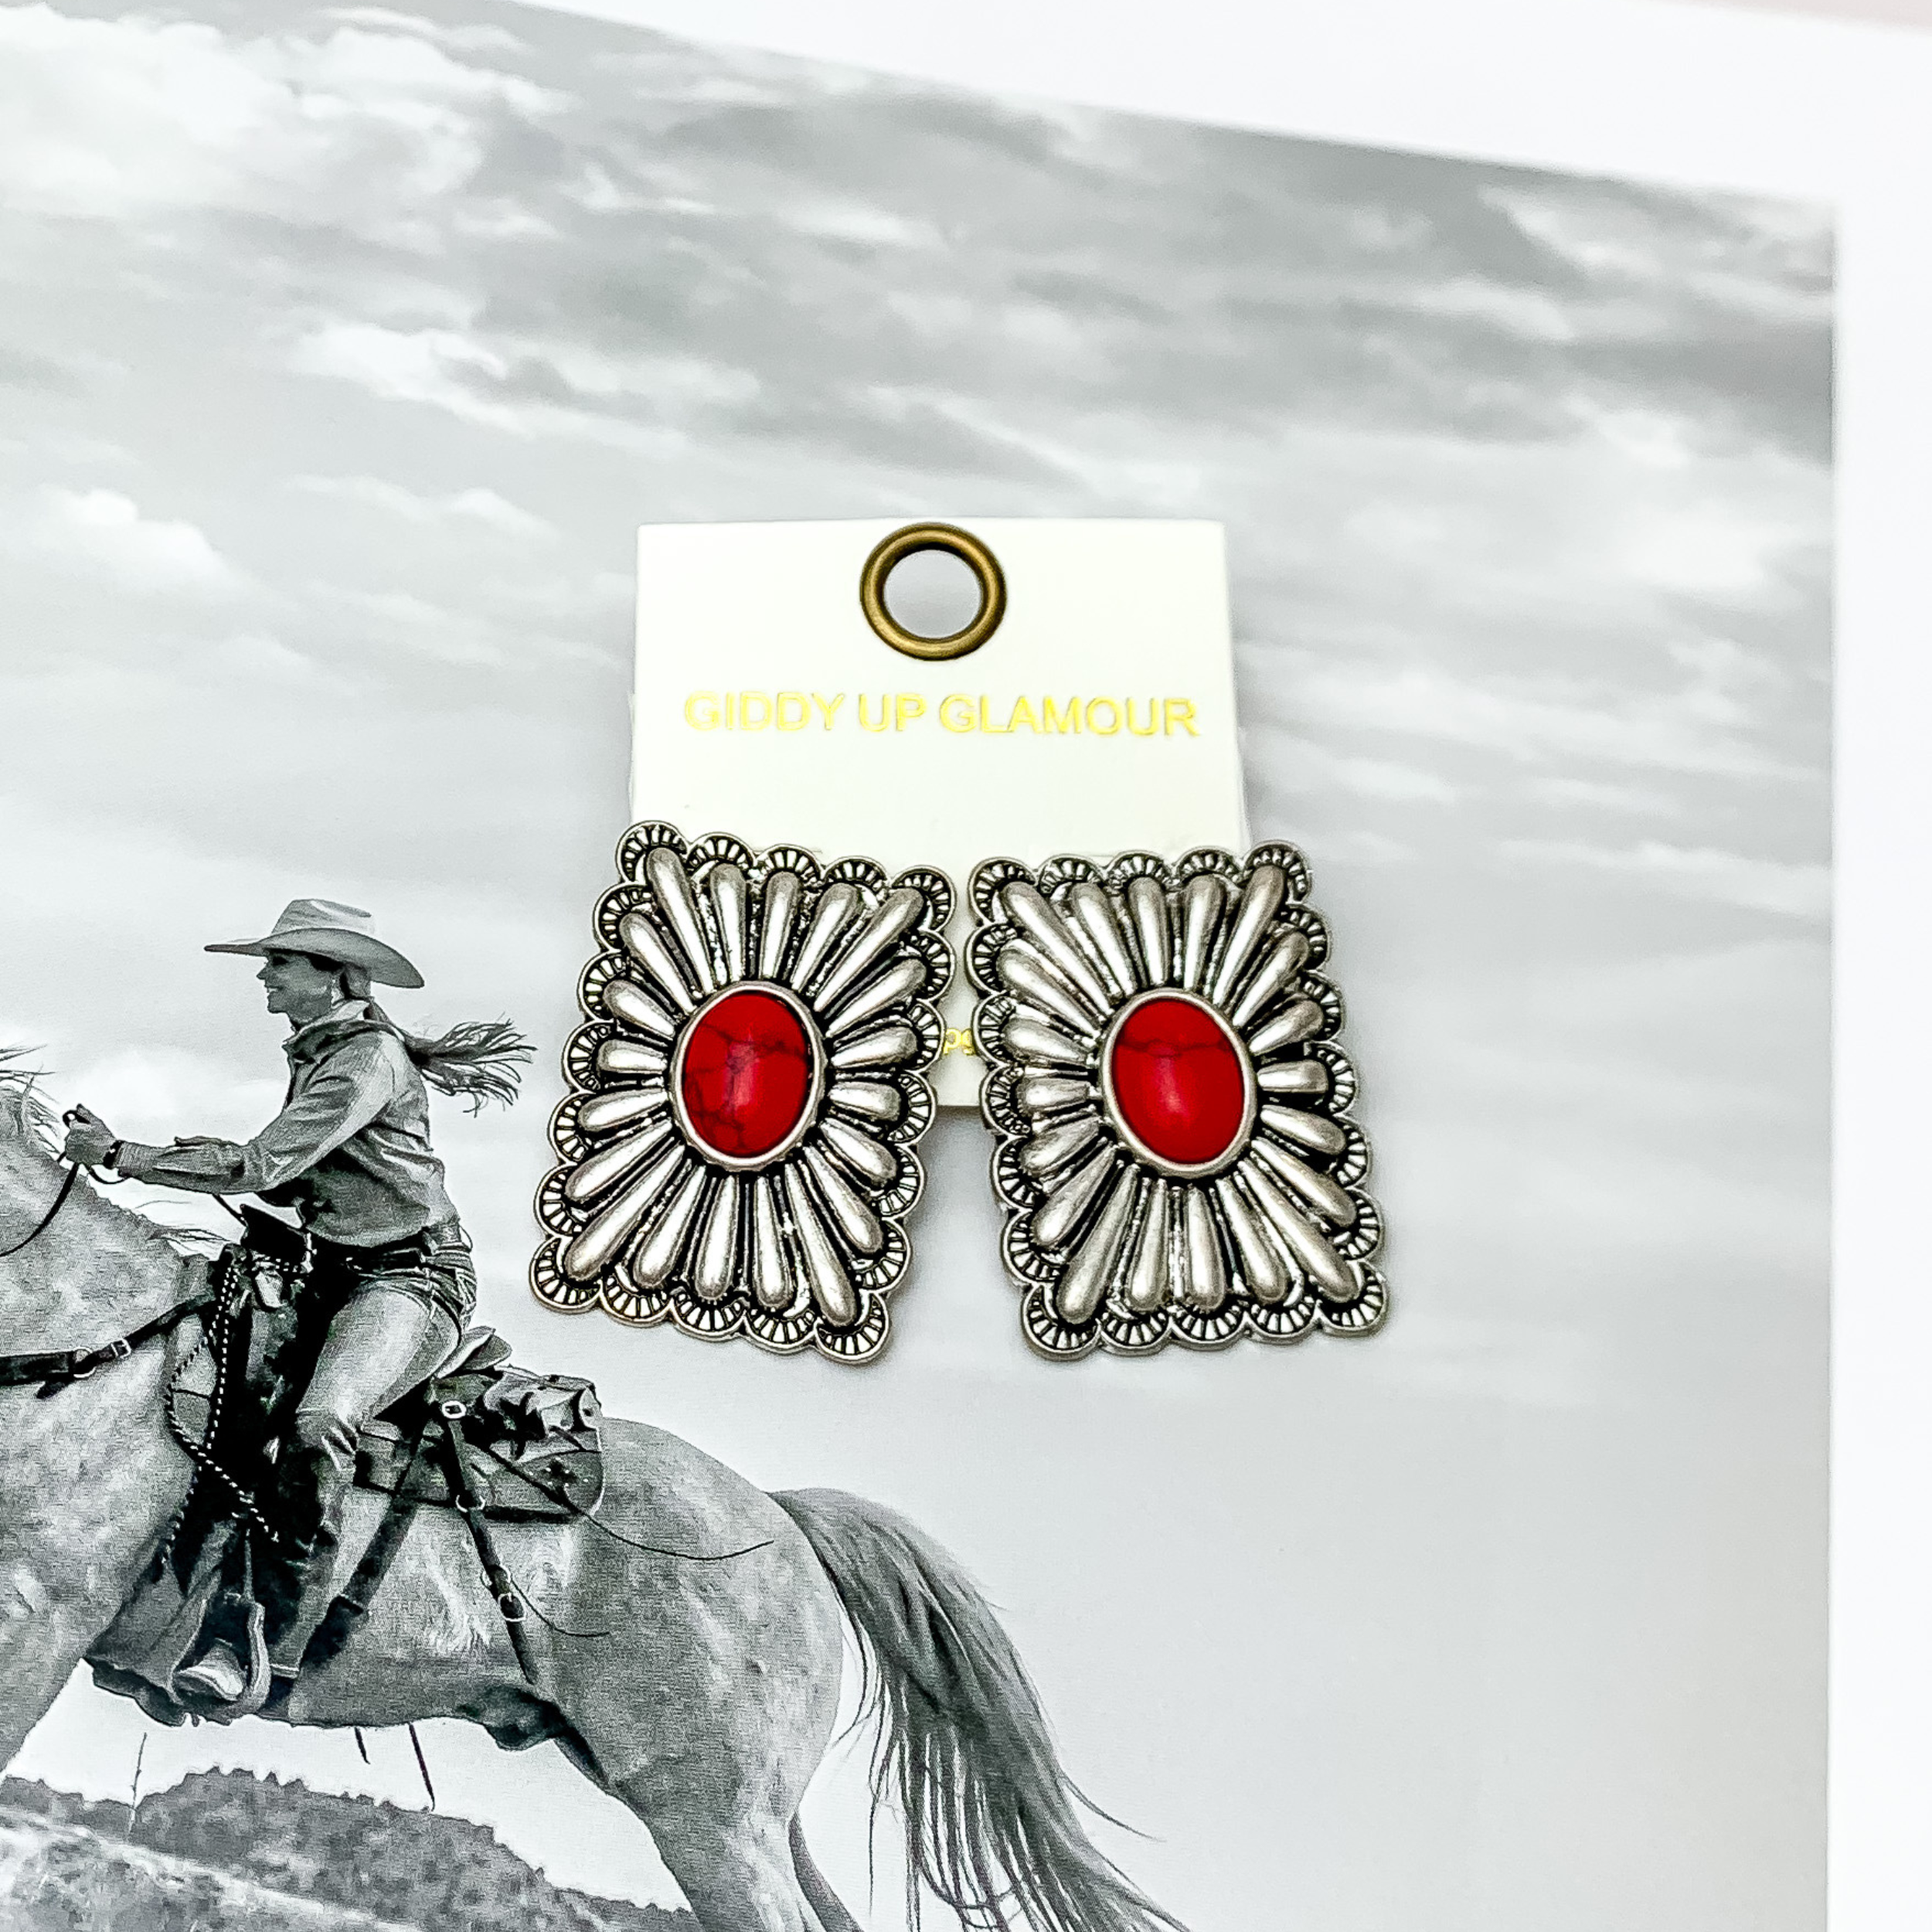 Western Flare Silver Tone Rectangle Earrings With Stone in Red. Pictured on a western scene background.